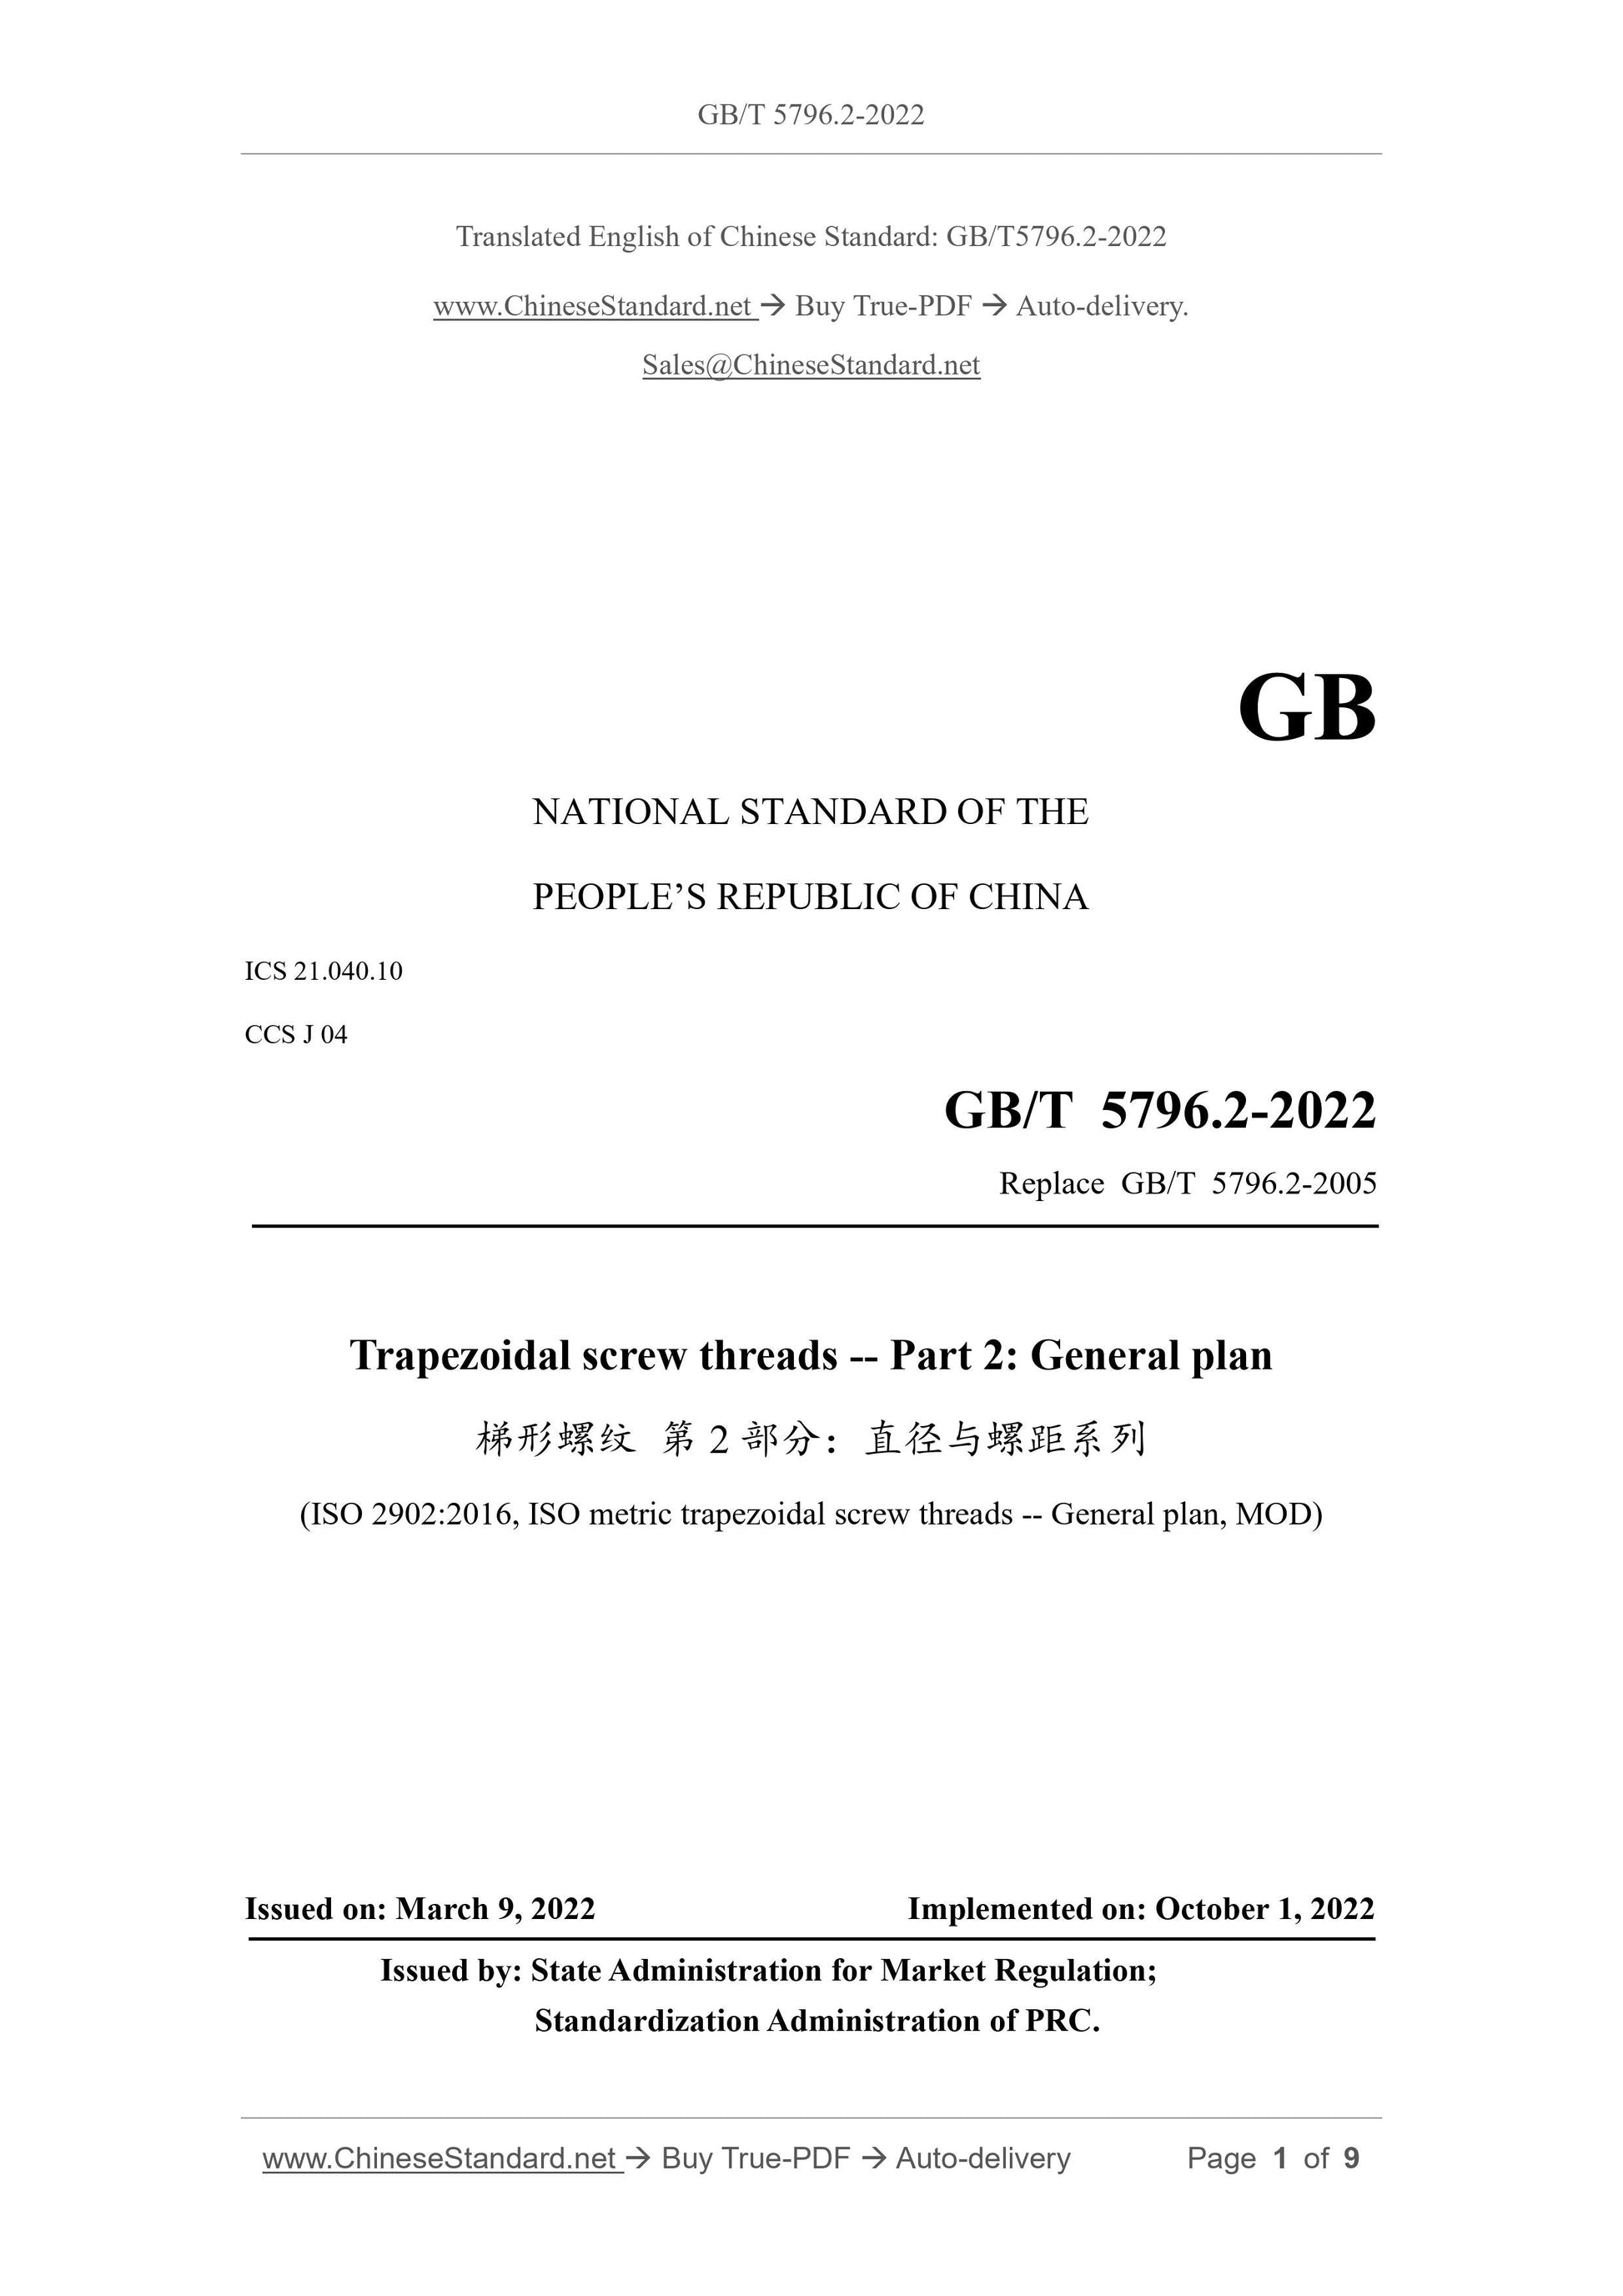 GB/T 5796.2-2022 Page 1